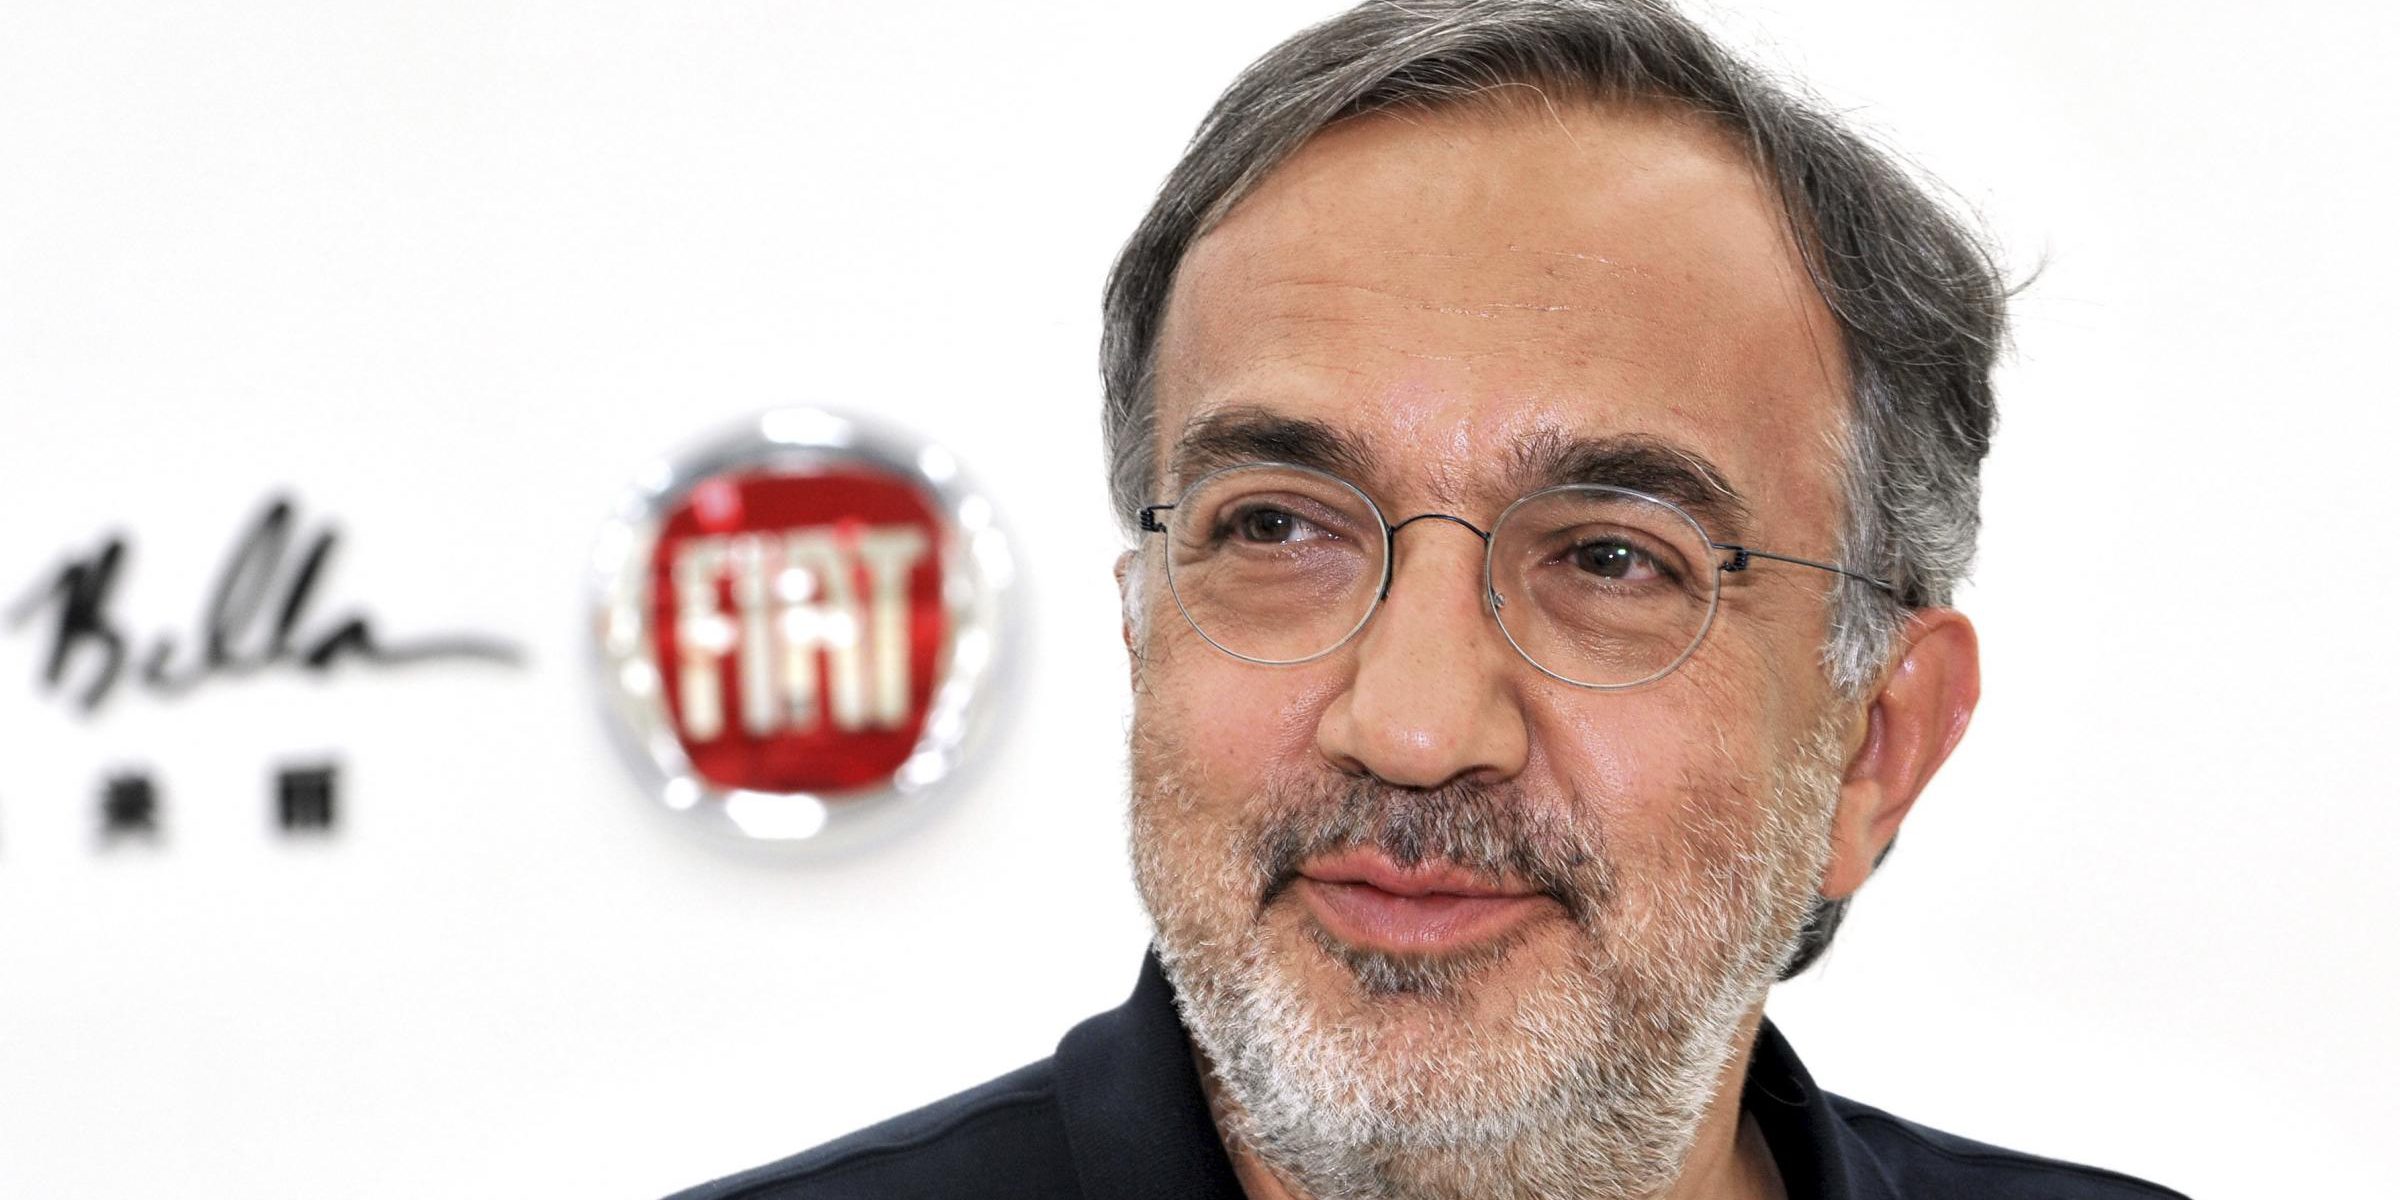 Sergio Marchionne, CEO of Fiat SpA, speaks during an interview at the Italian auto maker's joint venture plant with Guangzhou Automobile Corp (GAC) in Changsha, capital of central China's Hunan province, Thursday June 28, 2012. Fiat-Chrysler APAC announced the start of production of the Fiat Viaggio at the GAC-Fiat’s joint venture facility in China. (AP Photo) CHINA OUT